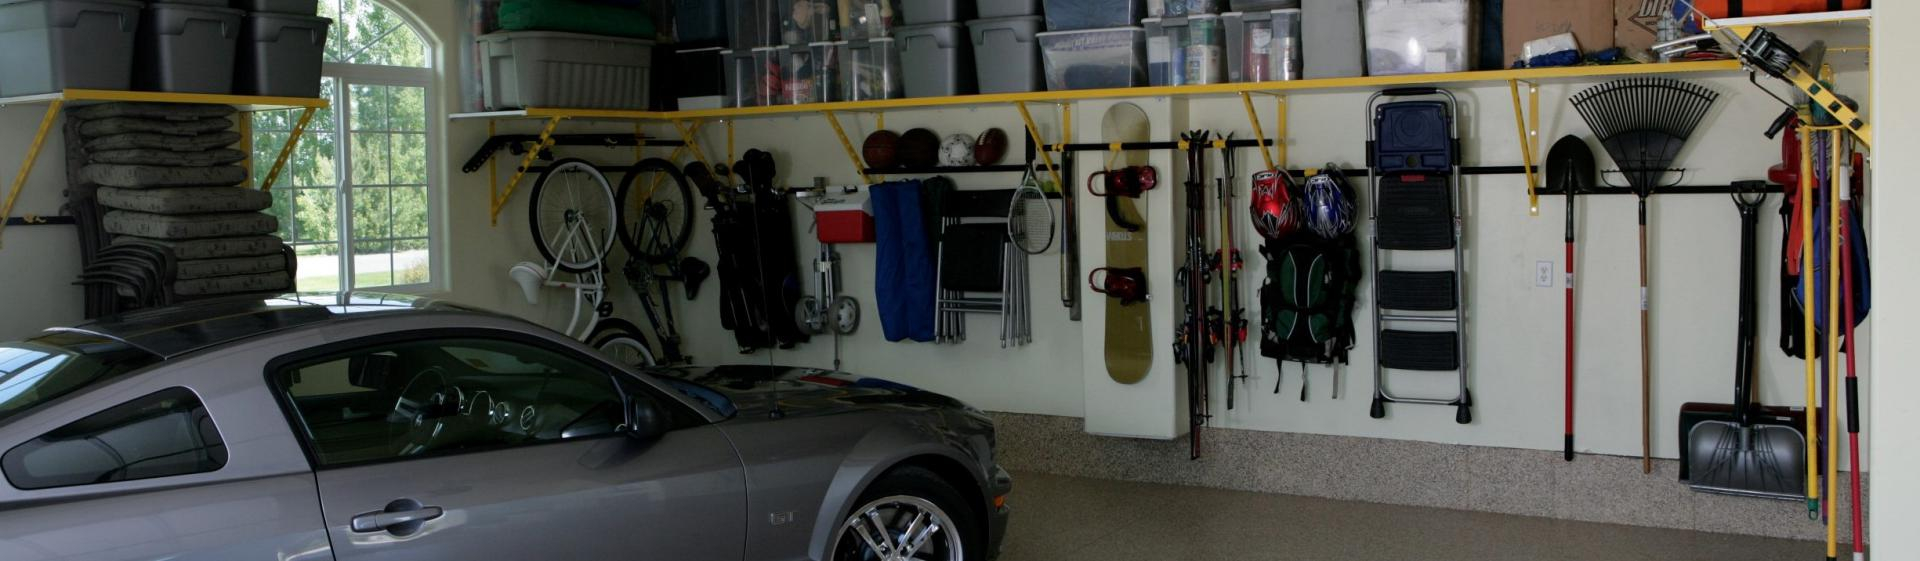 8 Best Garage Storage Systems Jul 2019 Reviews Buying Guide regarding dimensions 1920 X 561